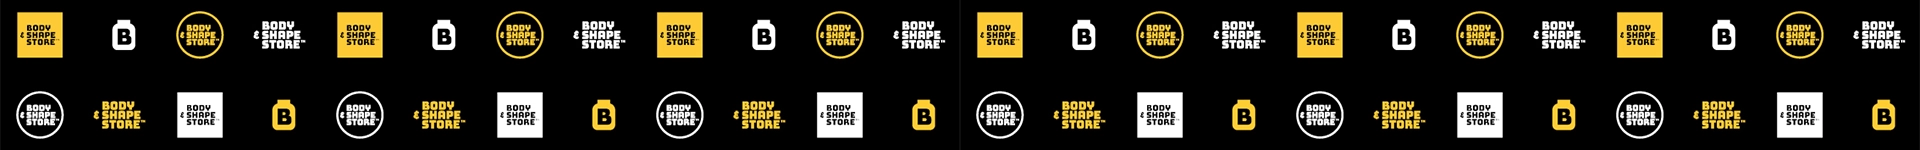 Body & Shape Store™s achtergrond